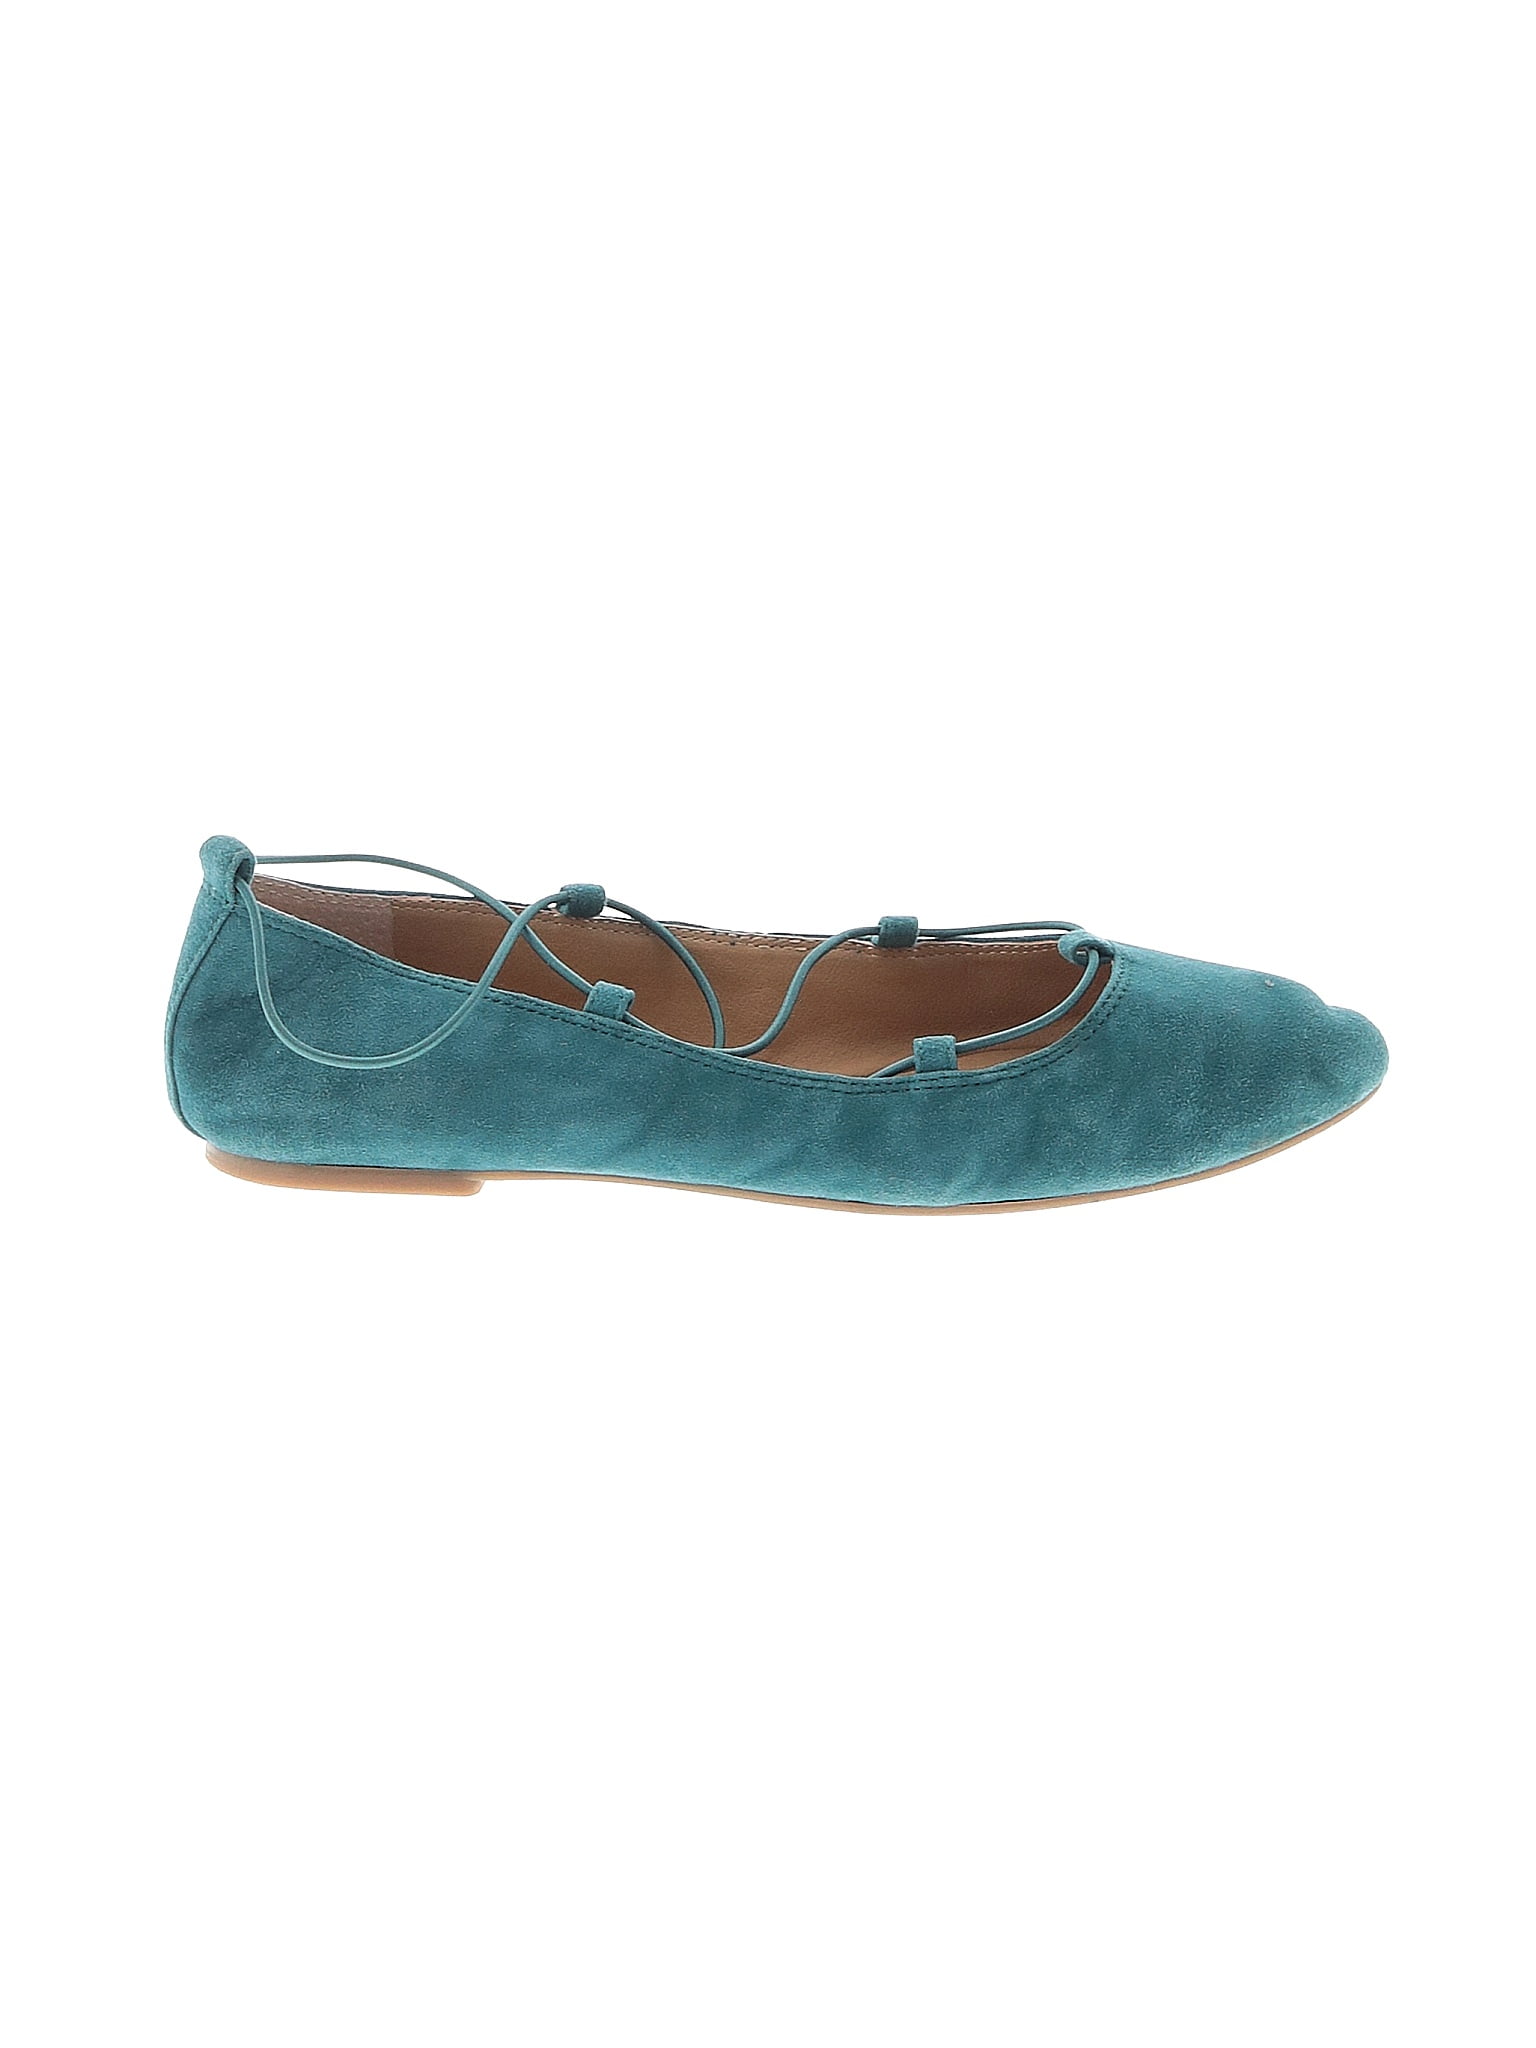 Lucky Brand Solid Teal Flats Size 8 - 56% off | thredUP